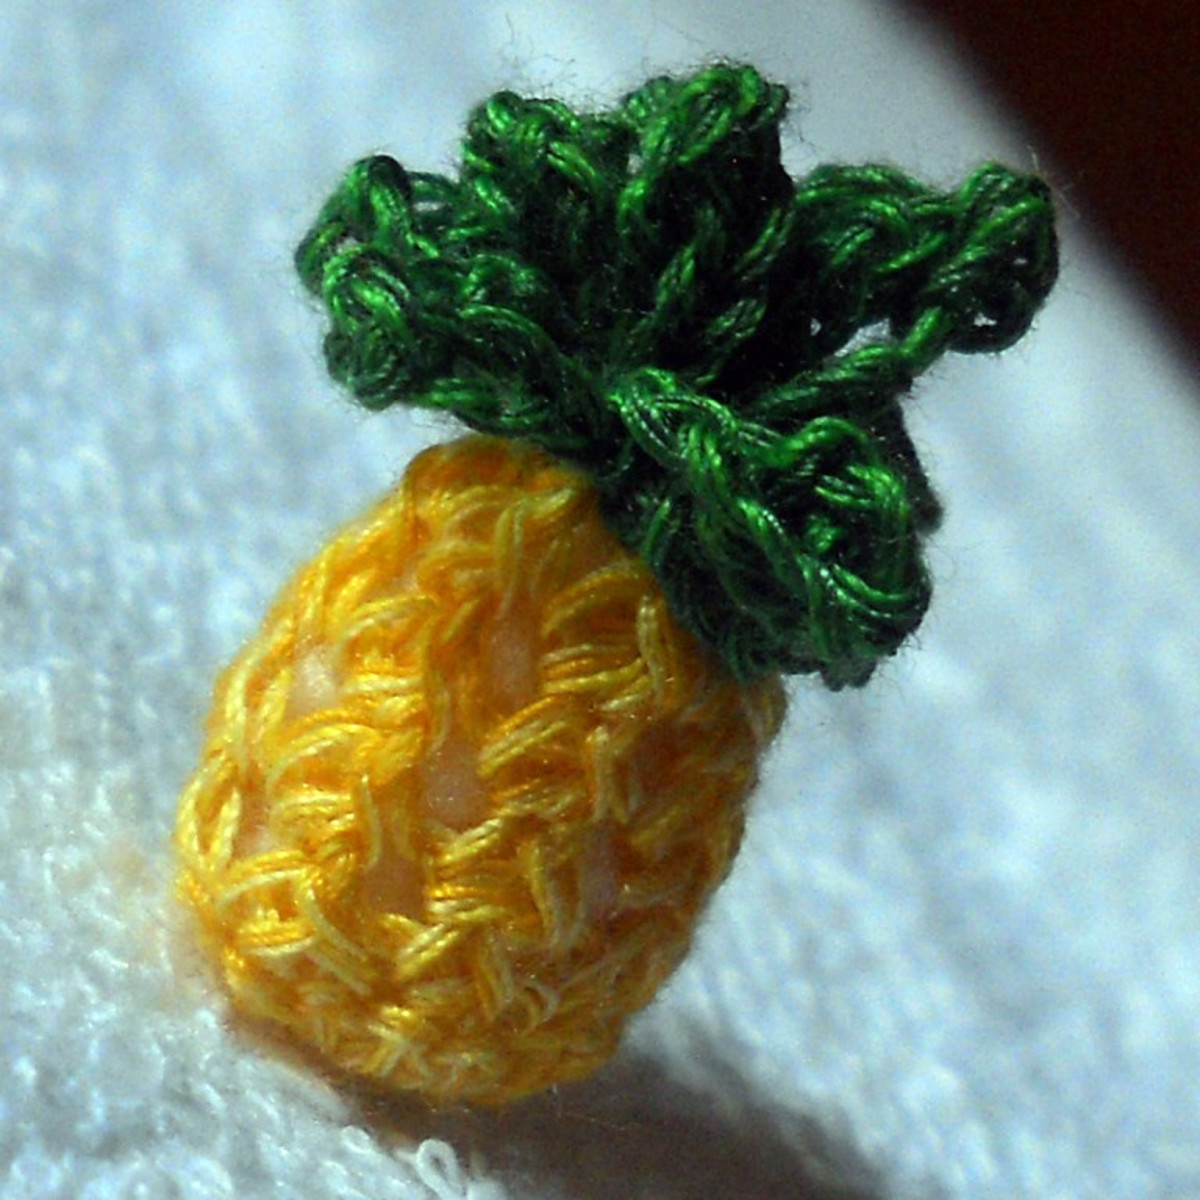 The body of this pineapple amigurumi is crocheted using the pineapple stitches. See how perfectly it mimics the texture of pineapples. That's probably why it's named as such.